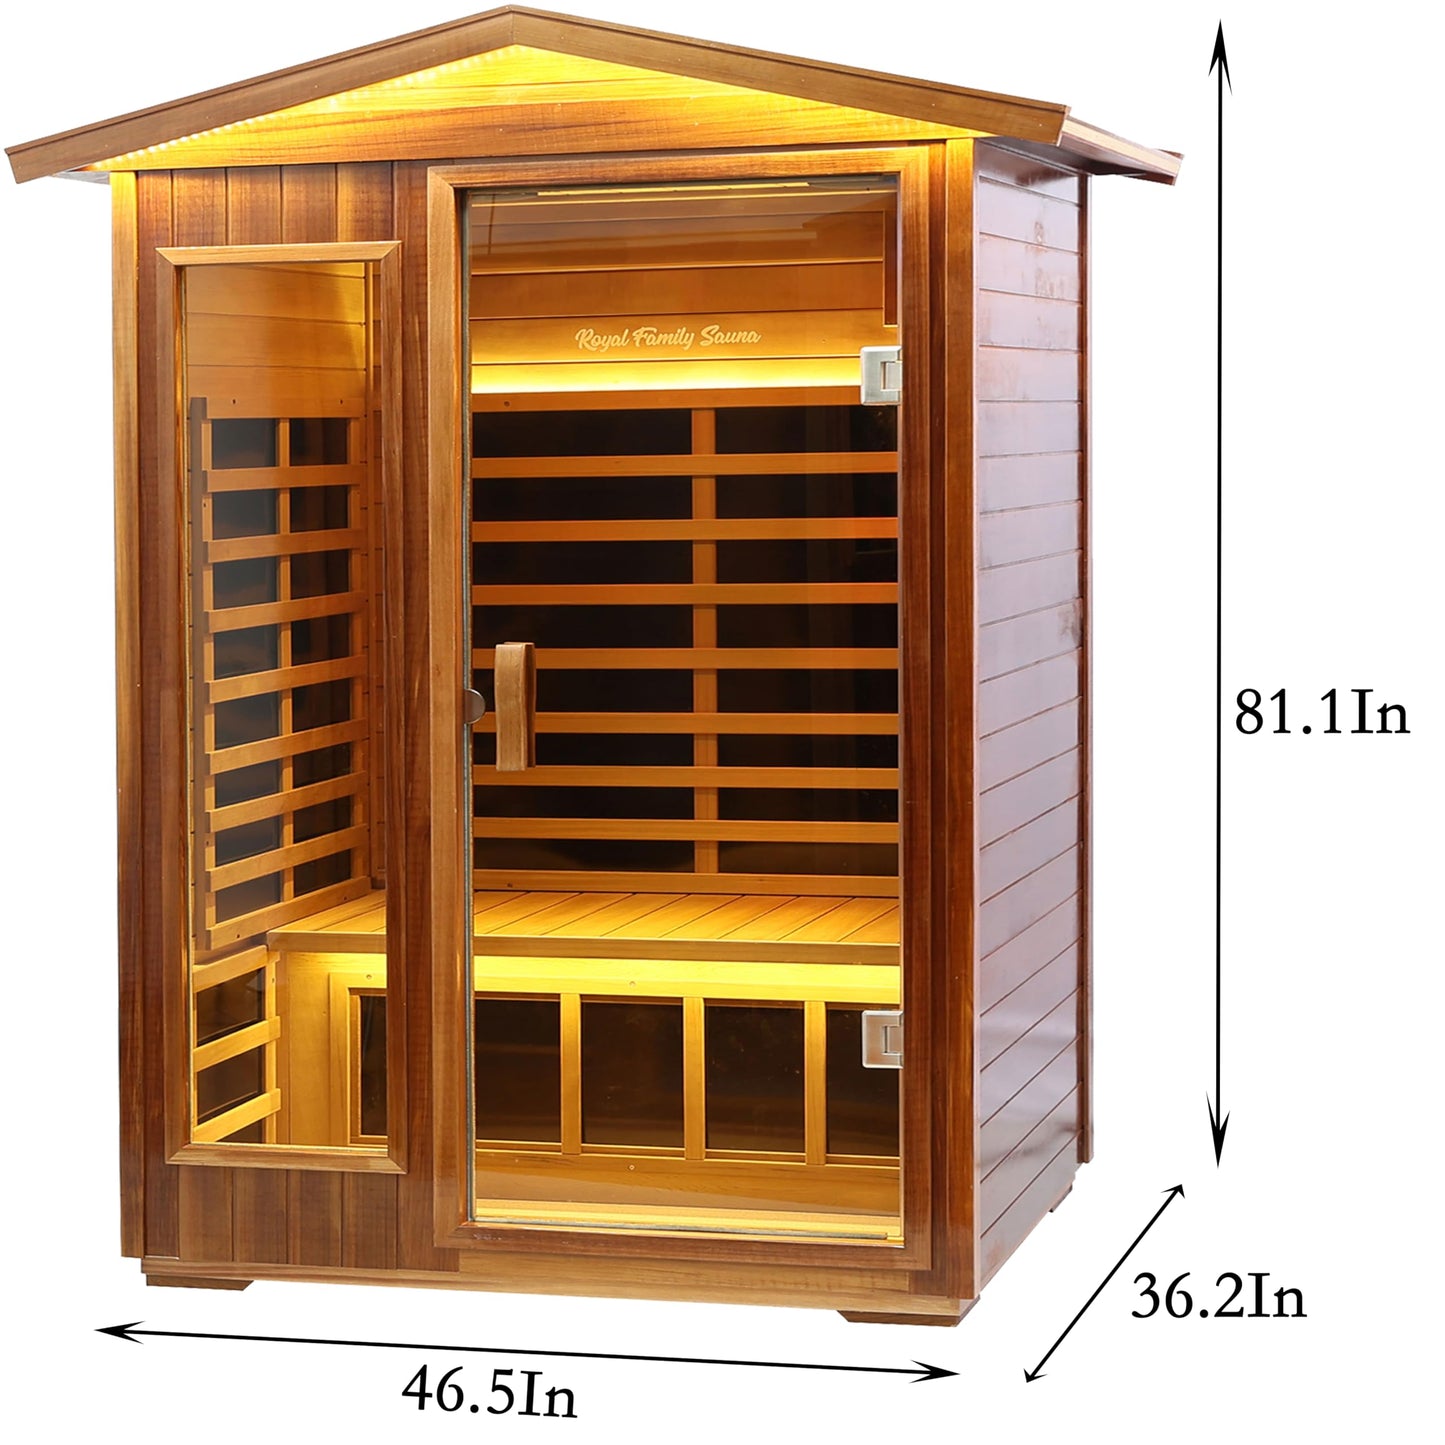 LTCCDSS Outdoor Red Cedar Sauna 2 Person Far Infrared Sauna, Red Cedar Canadian, Withstand Outdoor Temp -10℉-149℉| Low EMF Sauna Room for Home-9 Low EMF Heaters-Chromotherapys-Bluetooth Speaker